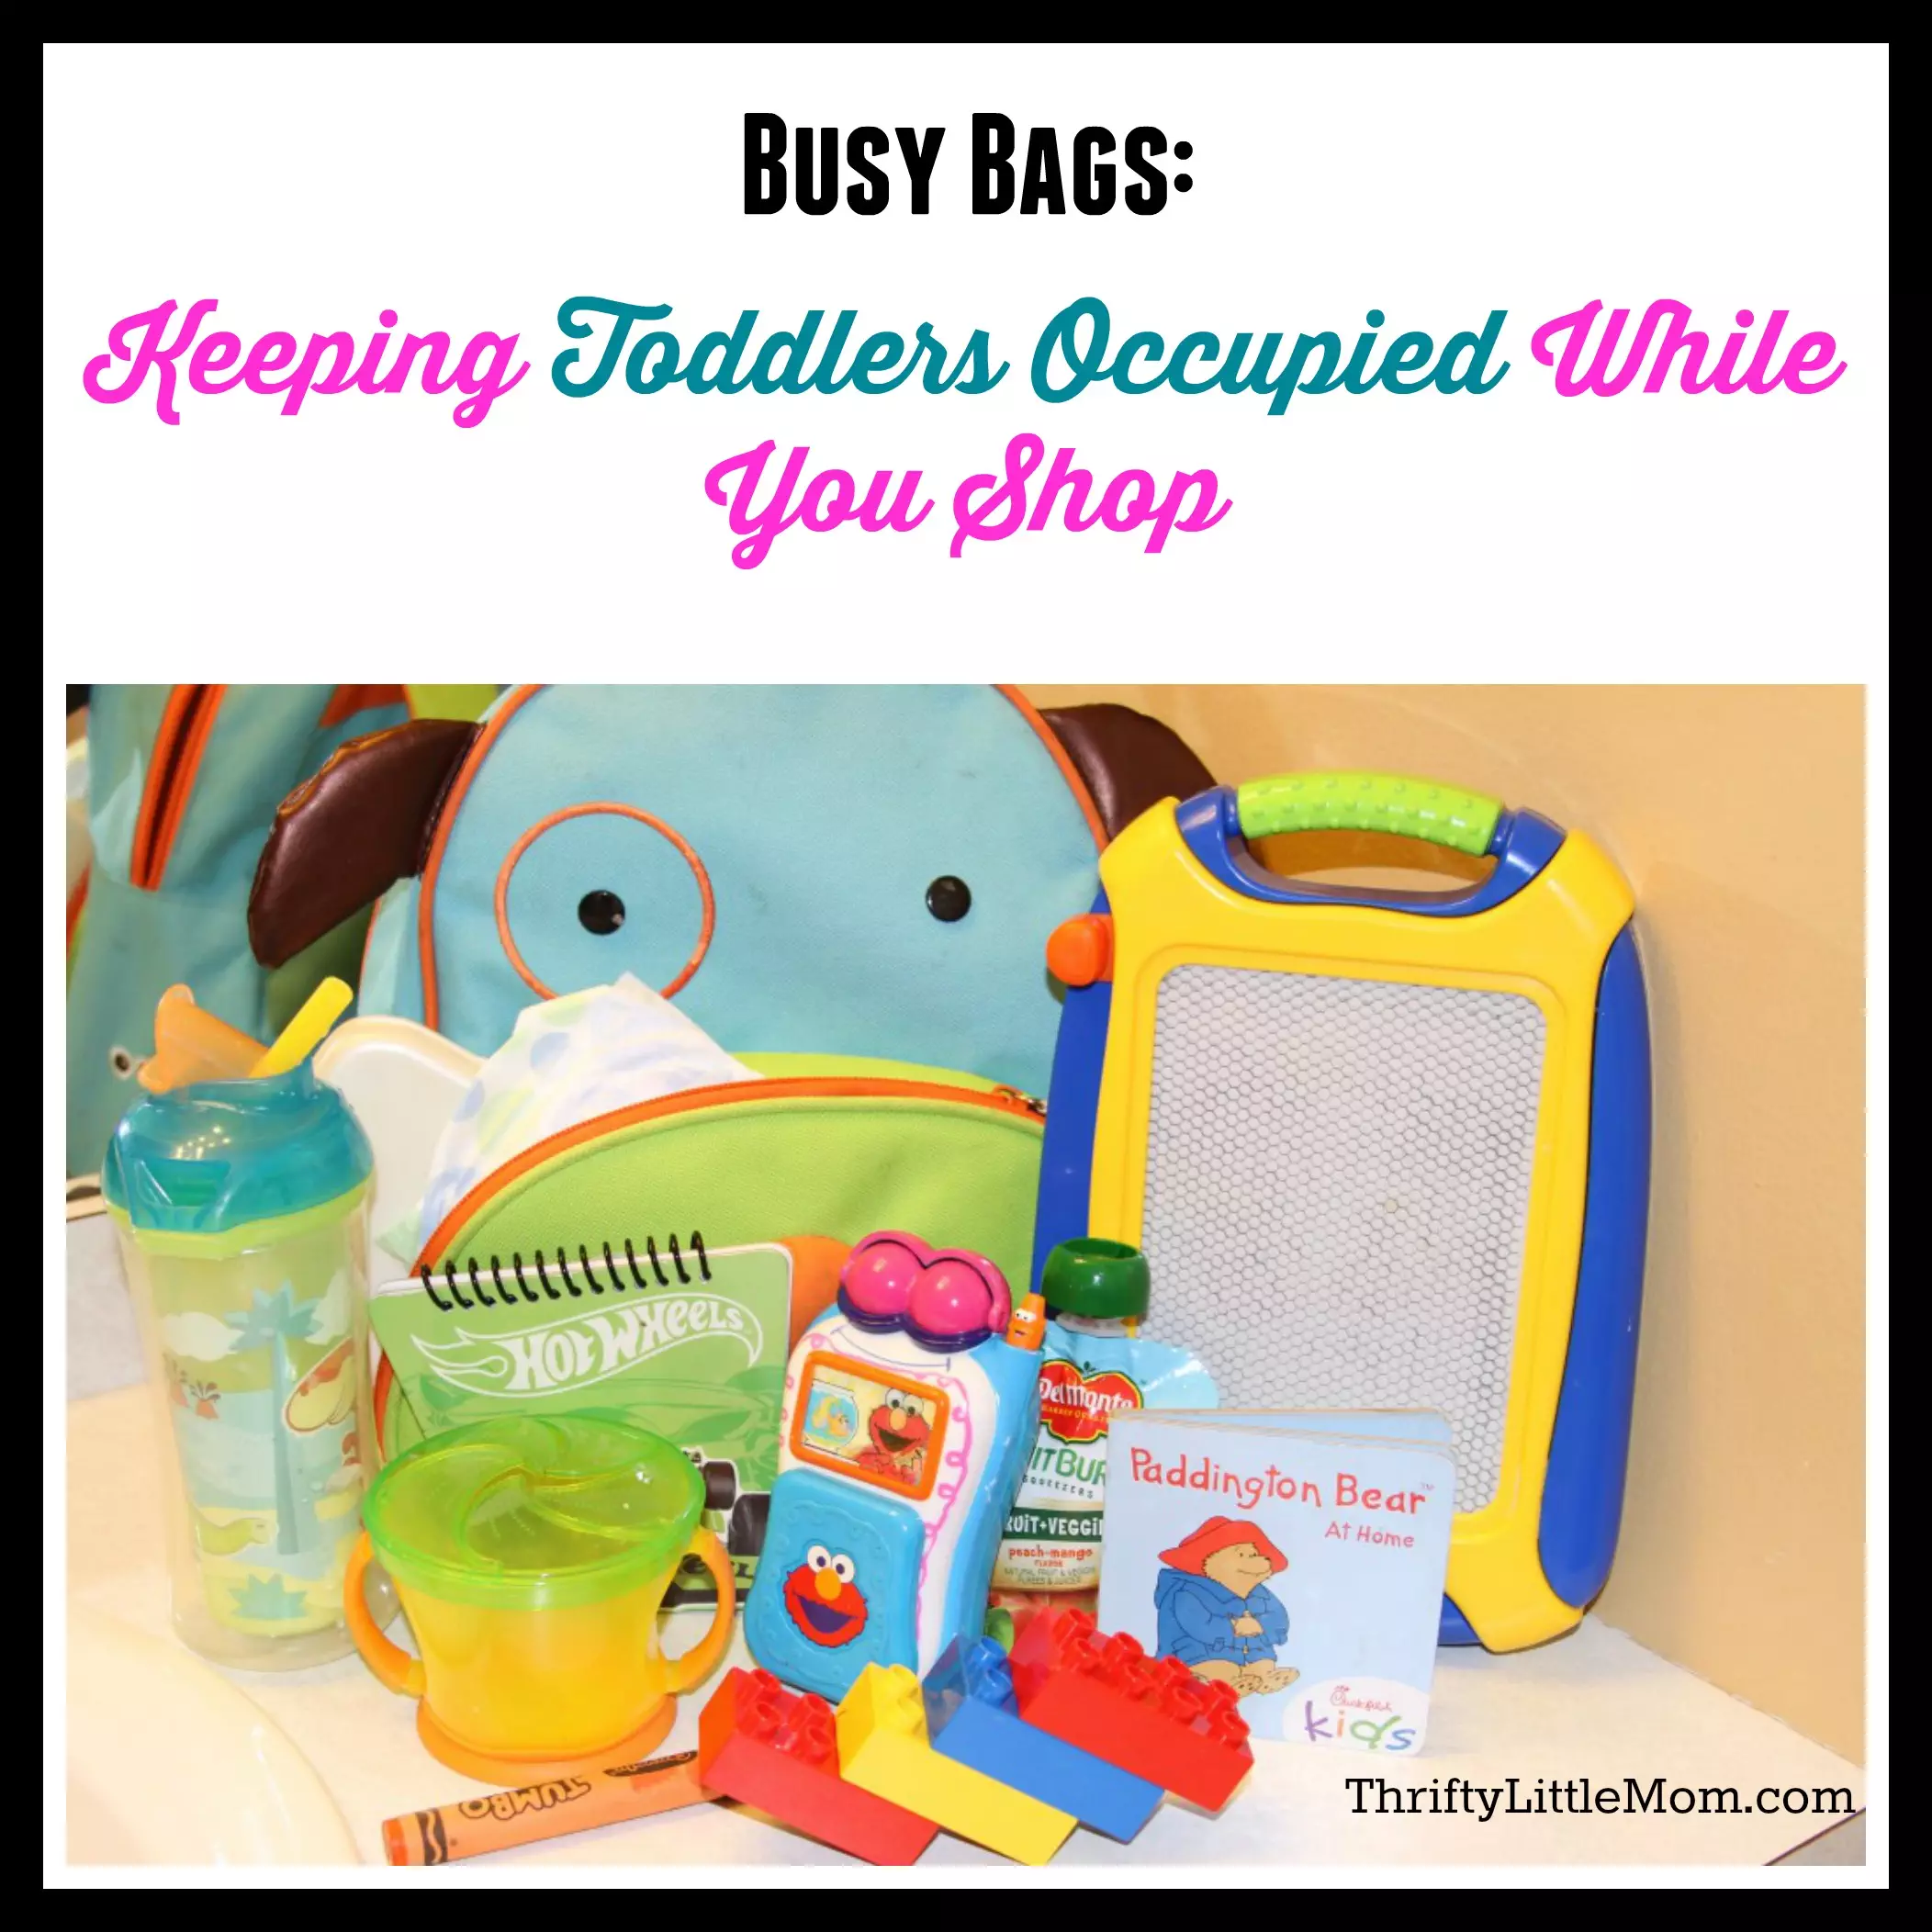 Busy Bags: Keeping Toddlers Occupied While You Shop